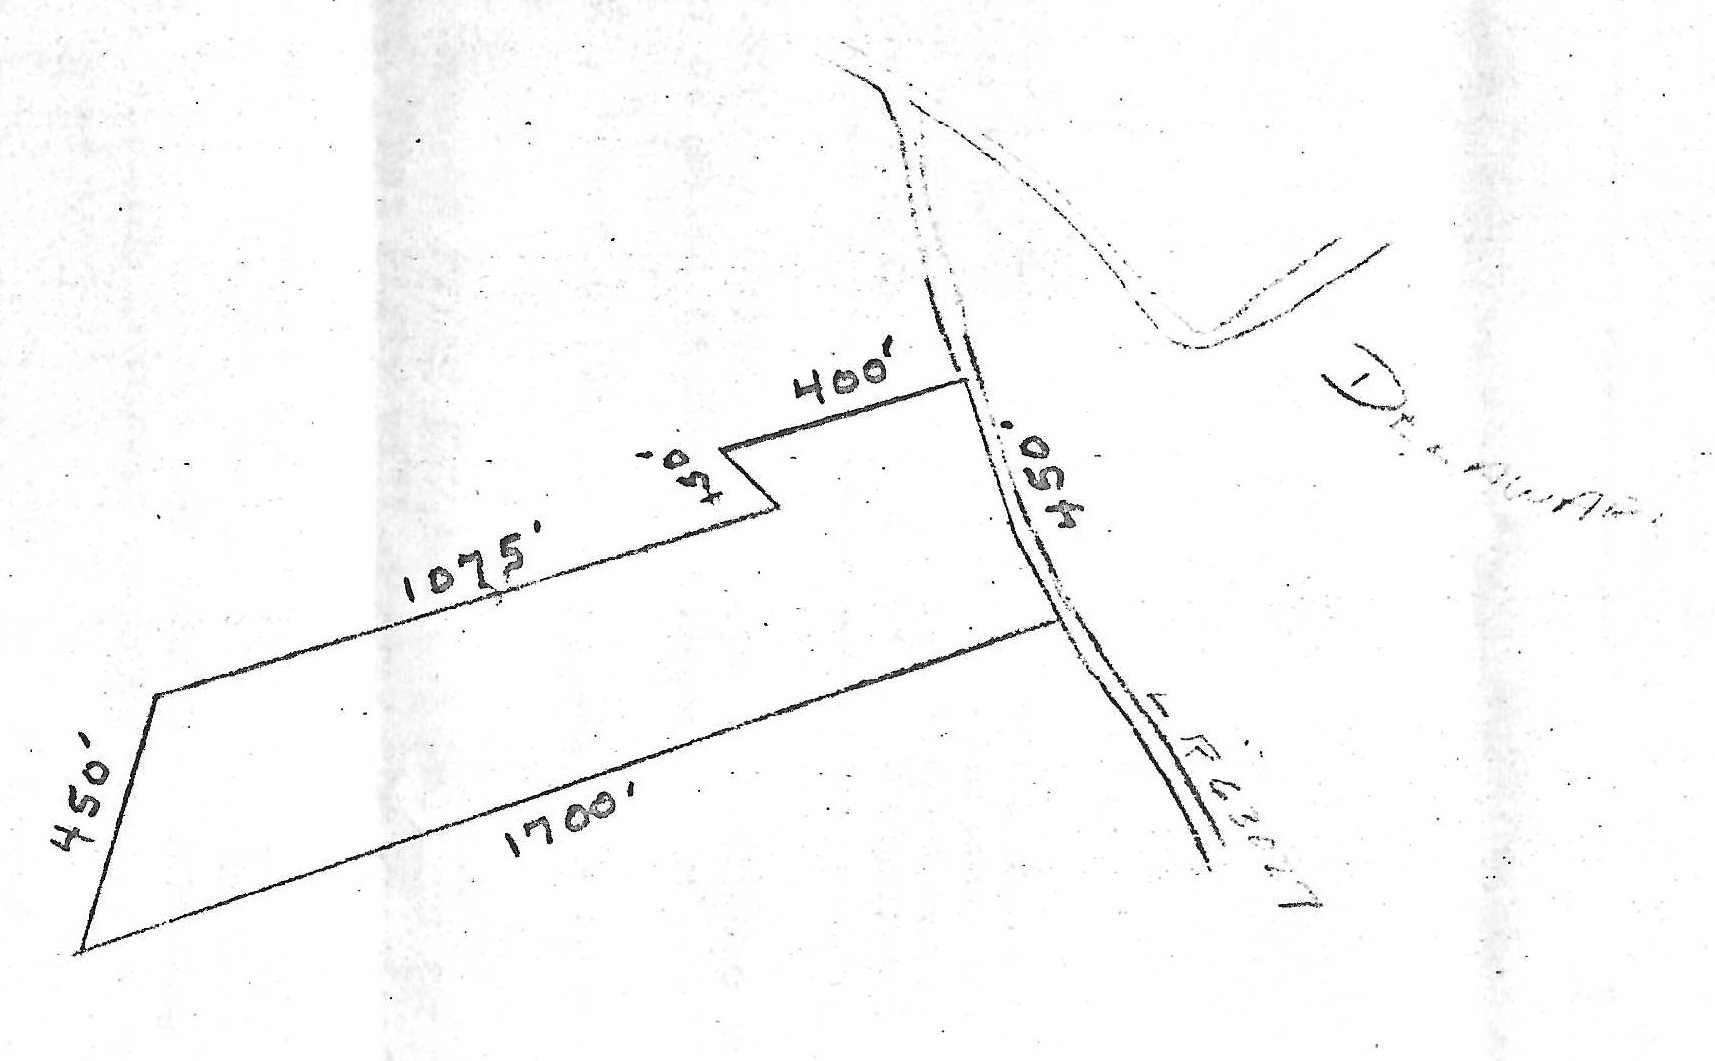 Scale 500' to 1 inch, per Wayne County Tax Map, Damascus Twp., p. 217.